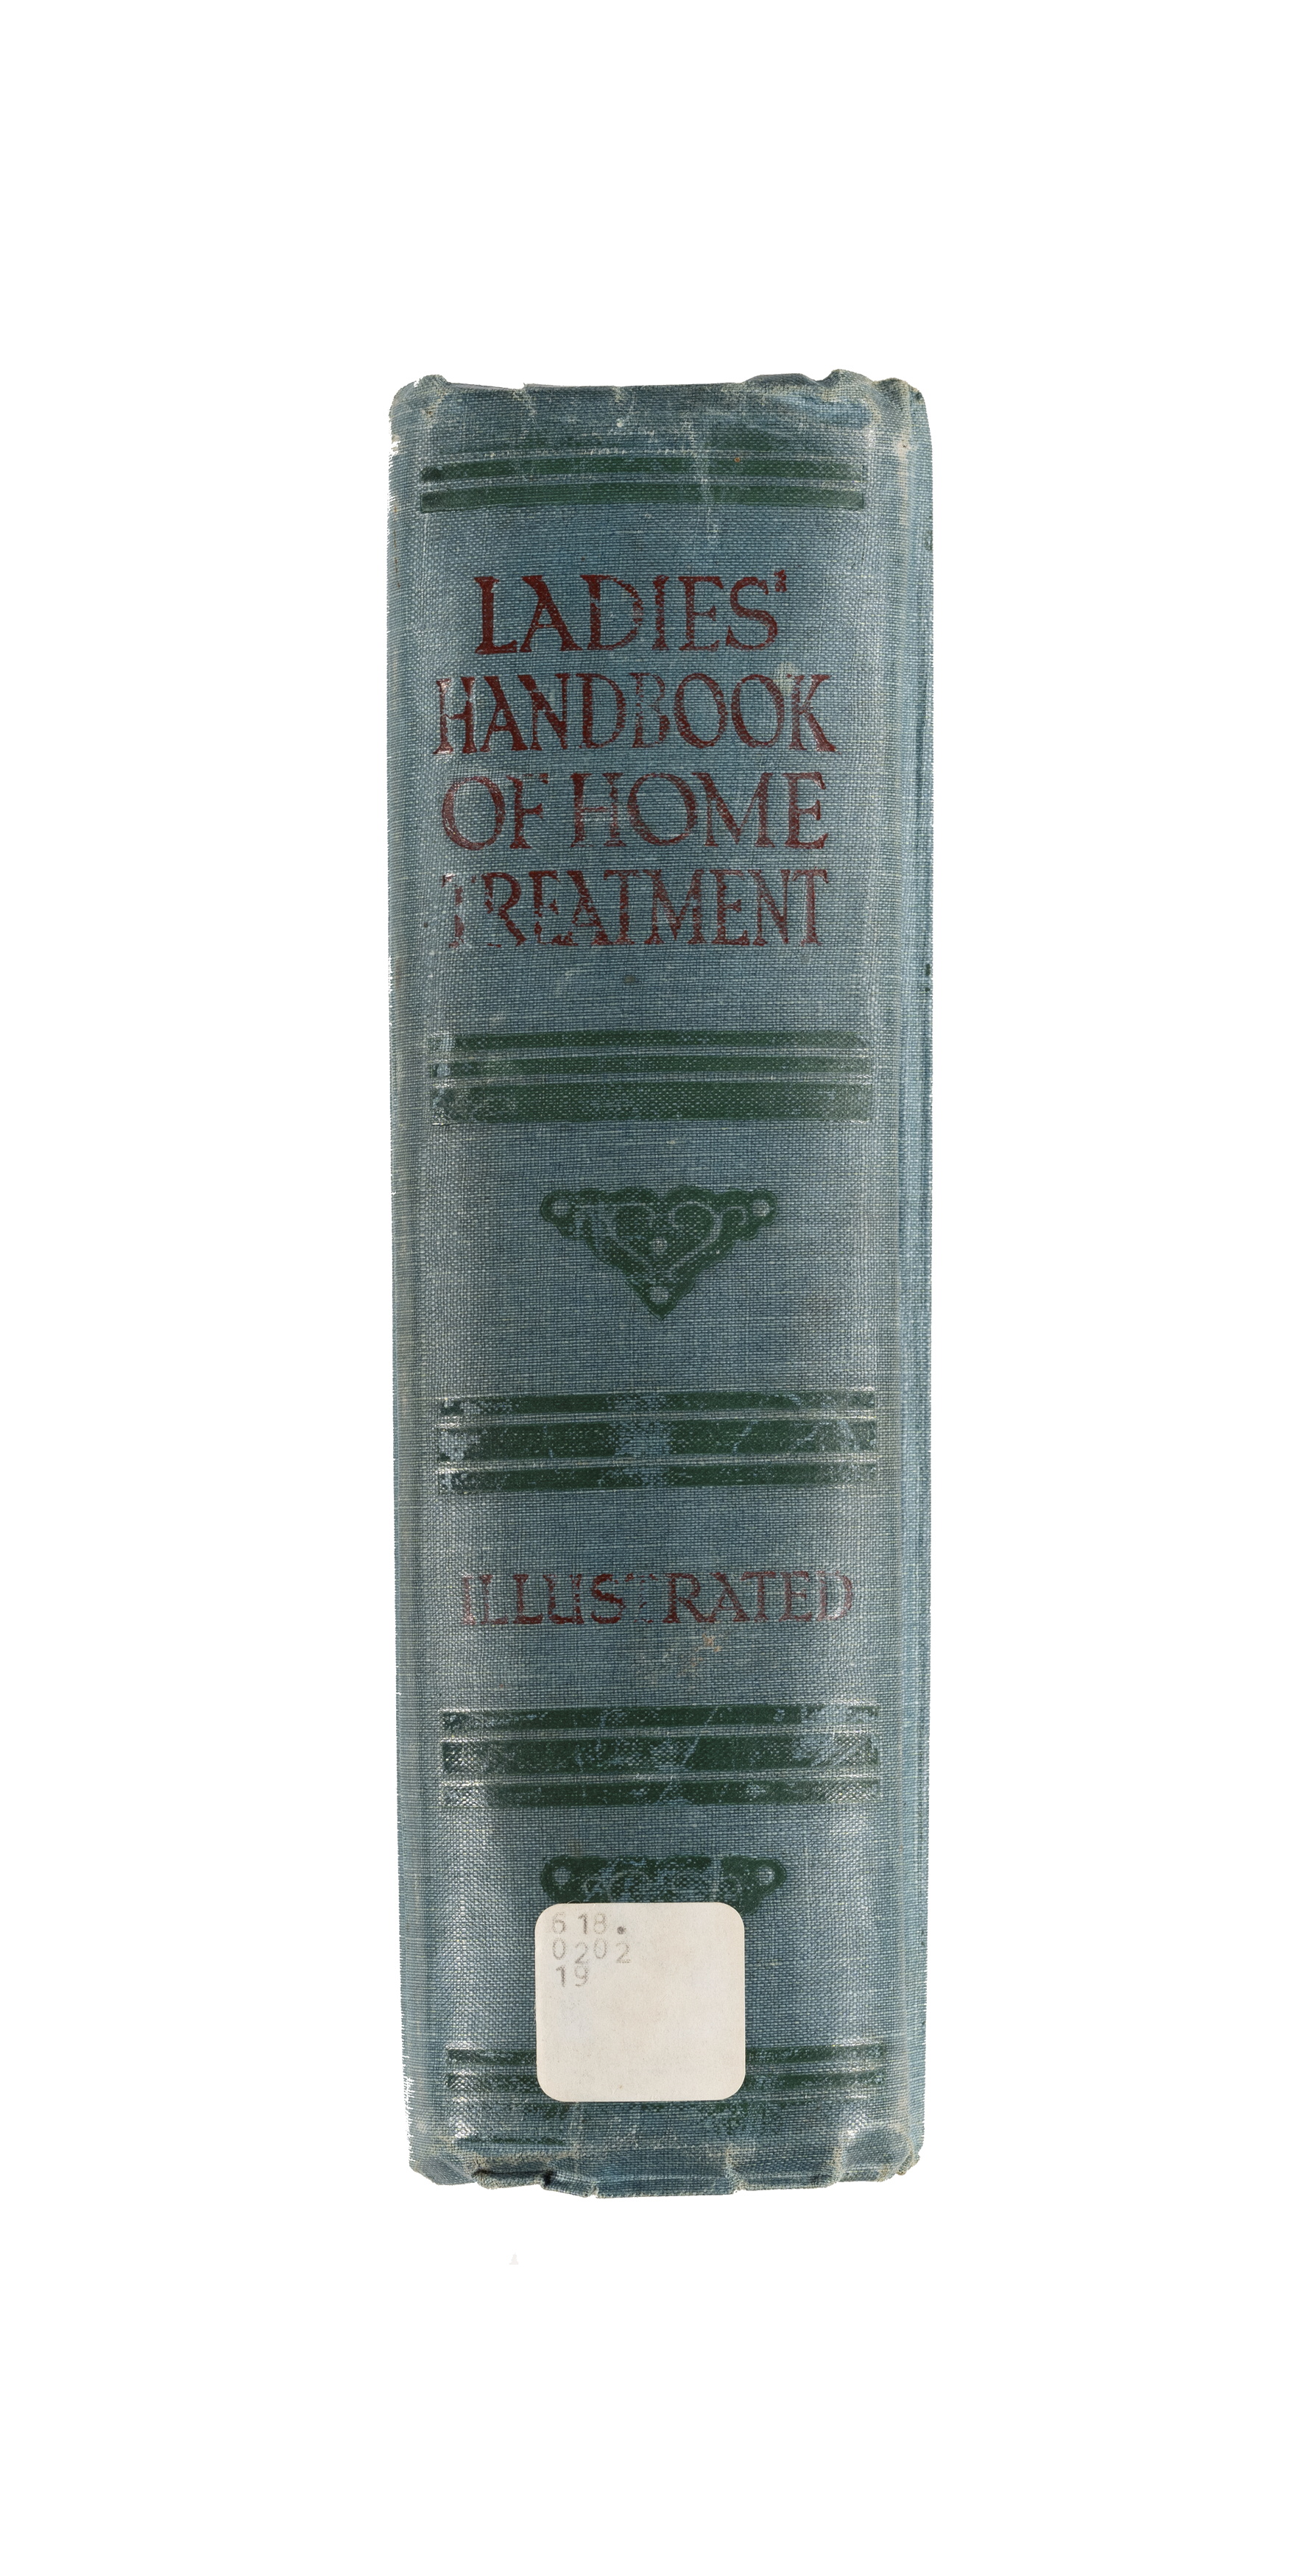 'Ladies Handbook of Home Treatment' by Richards and Richards